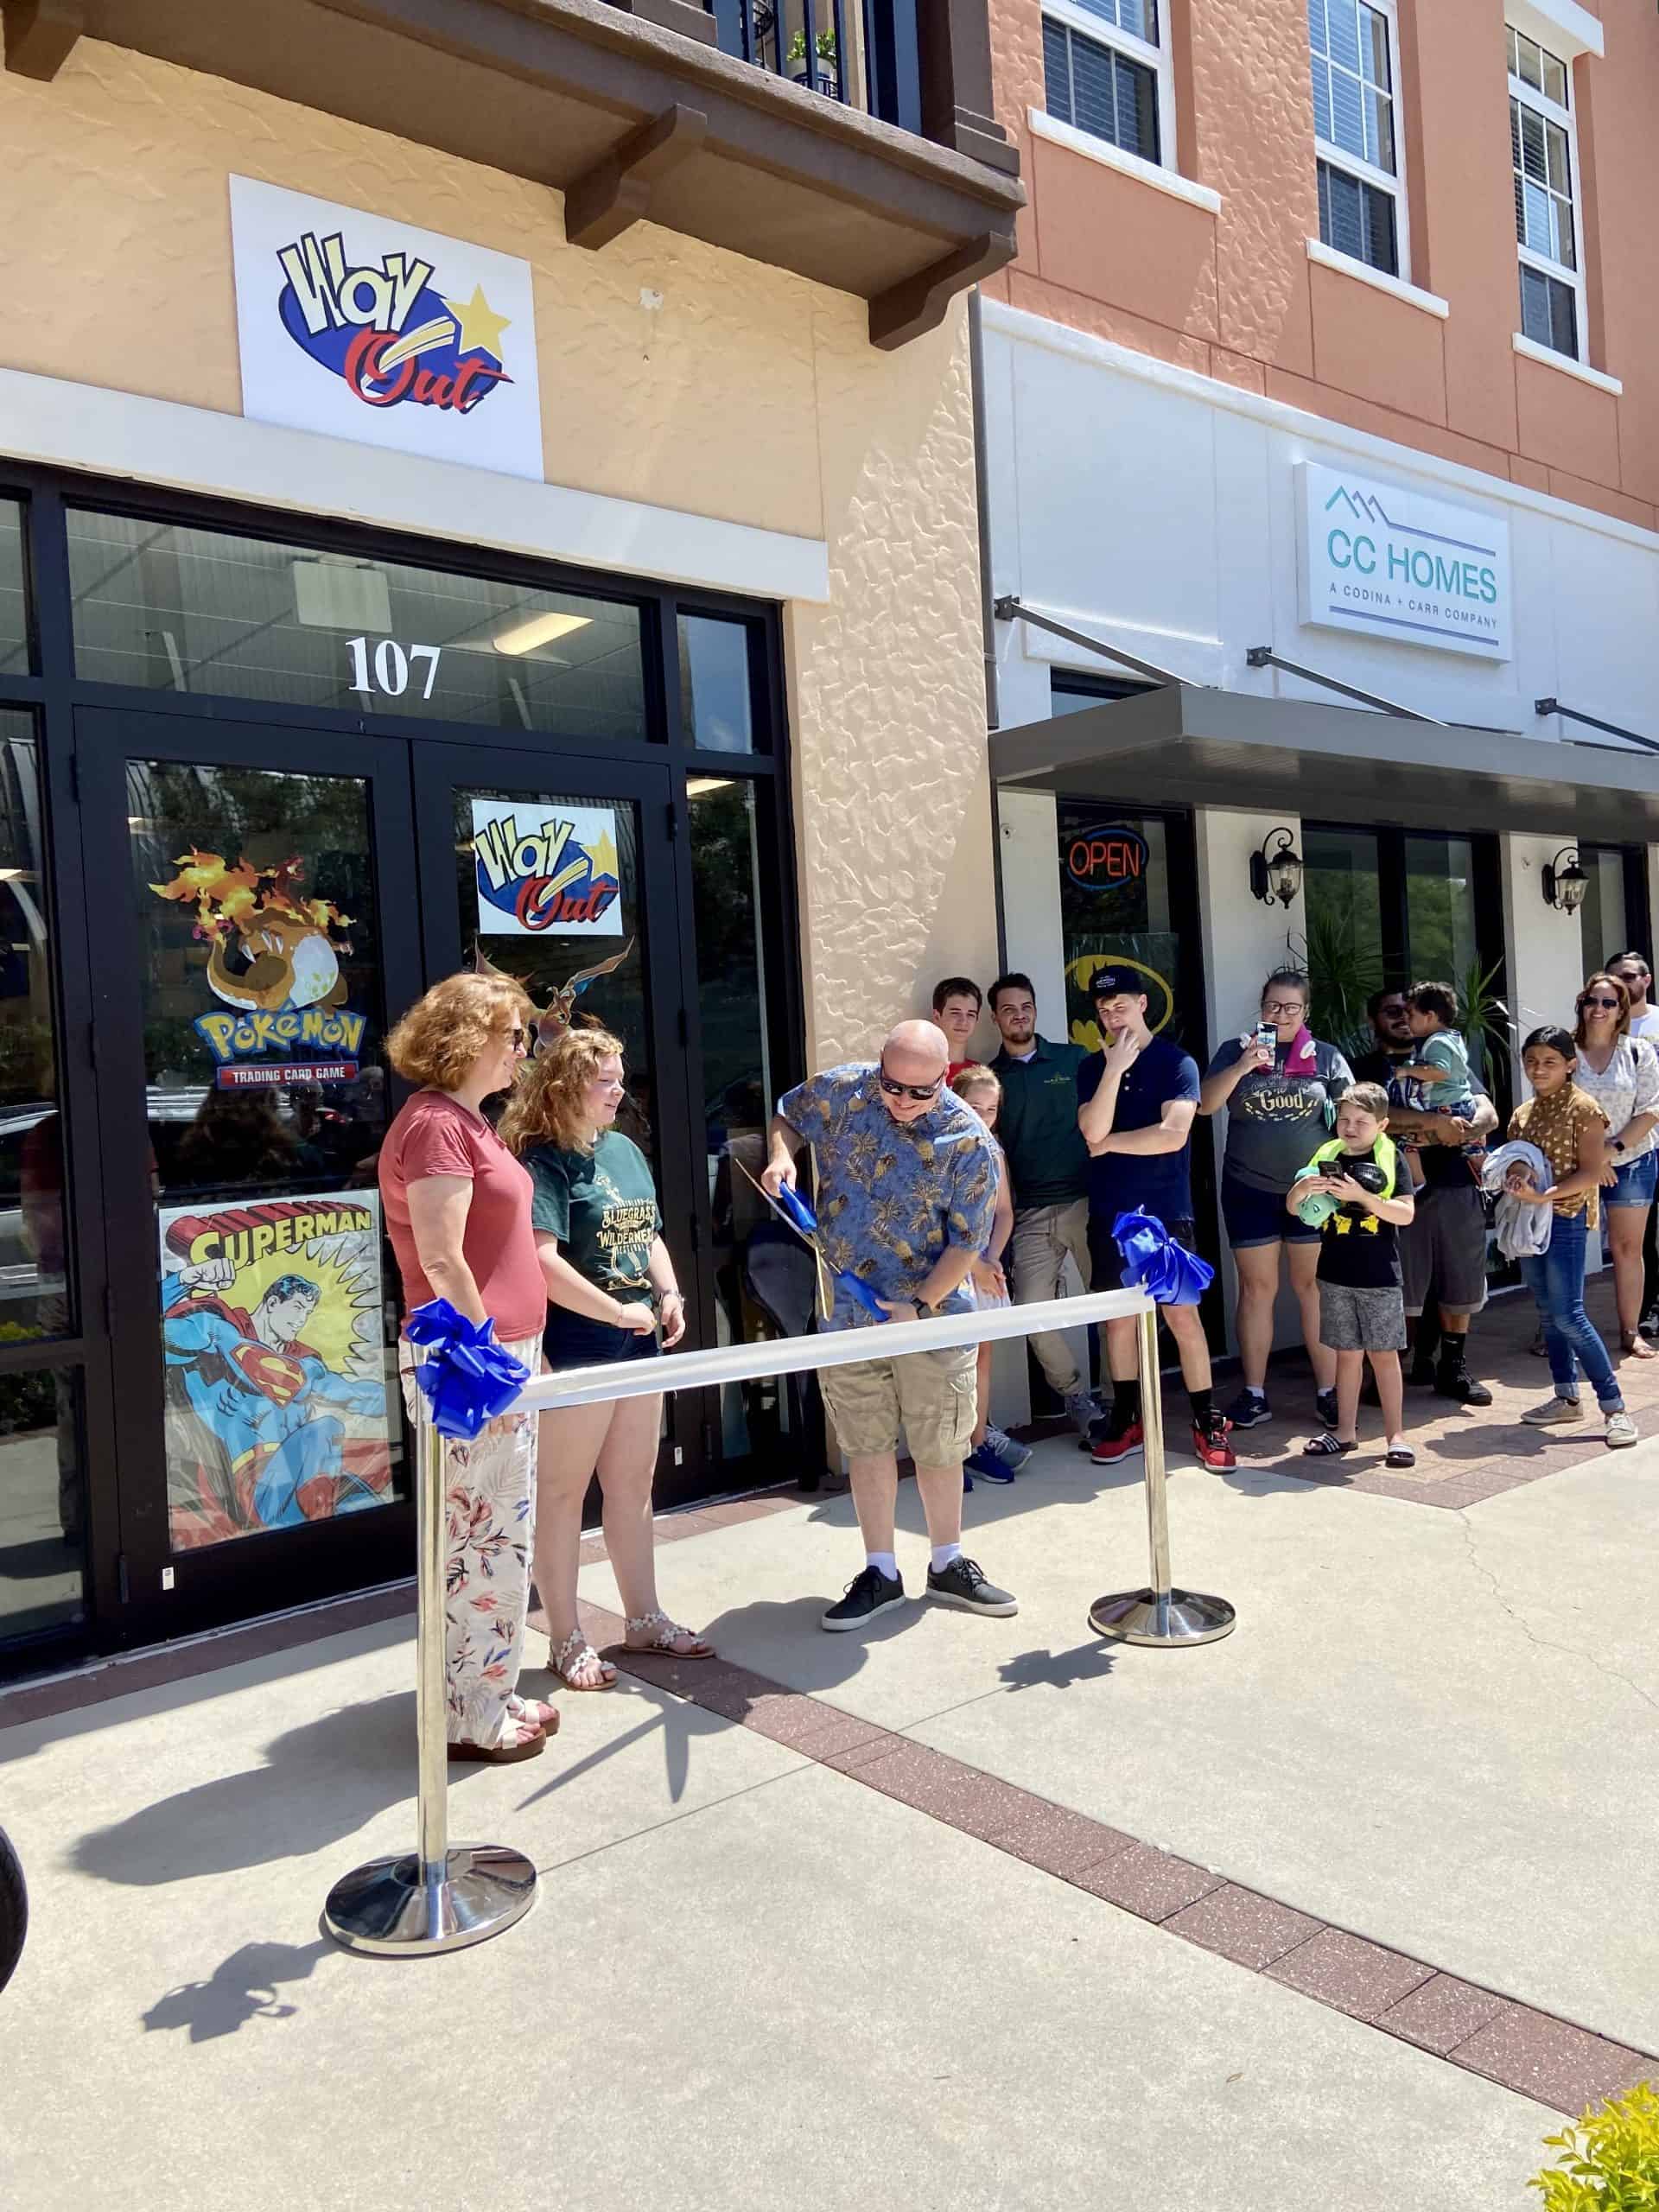 Way Out Toys & Games Grand Opening in Ave Maria Town Center